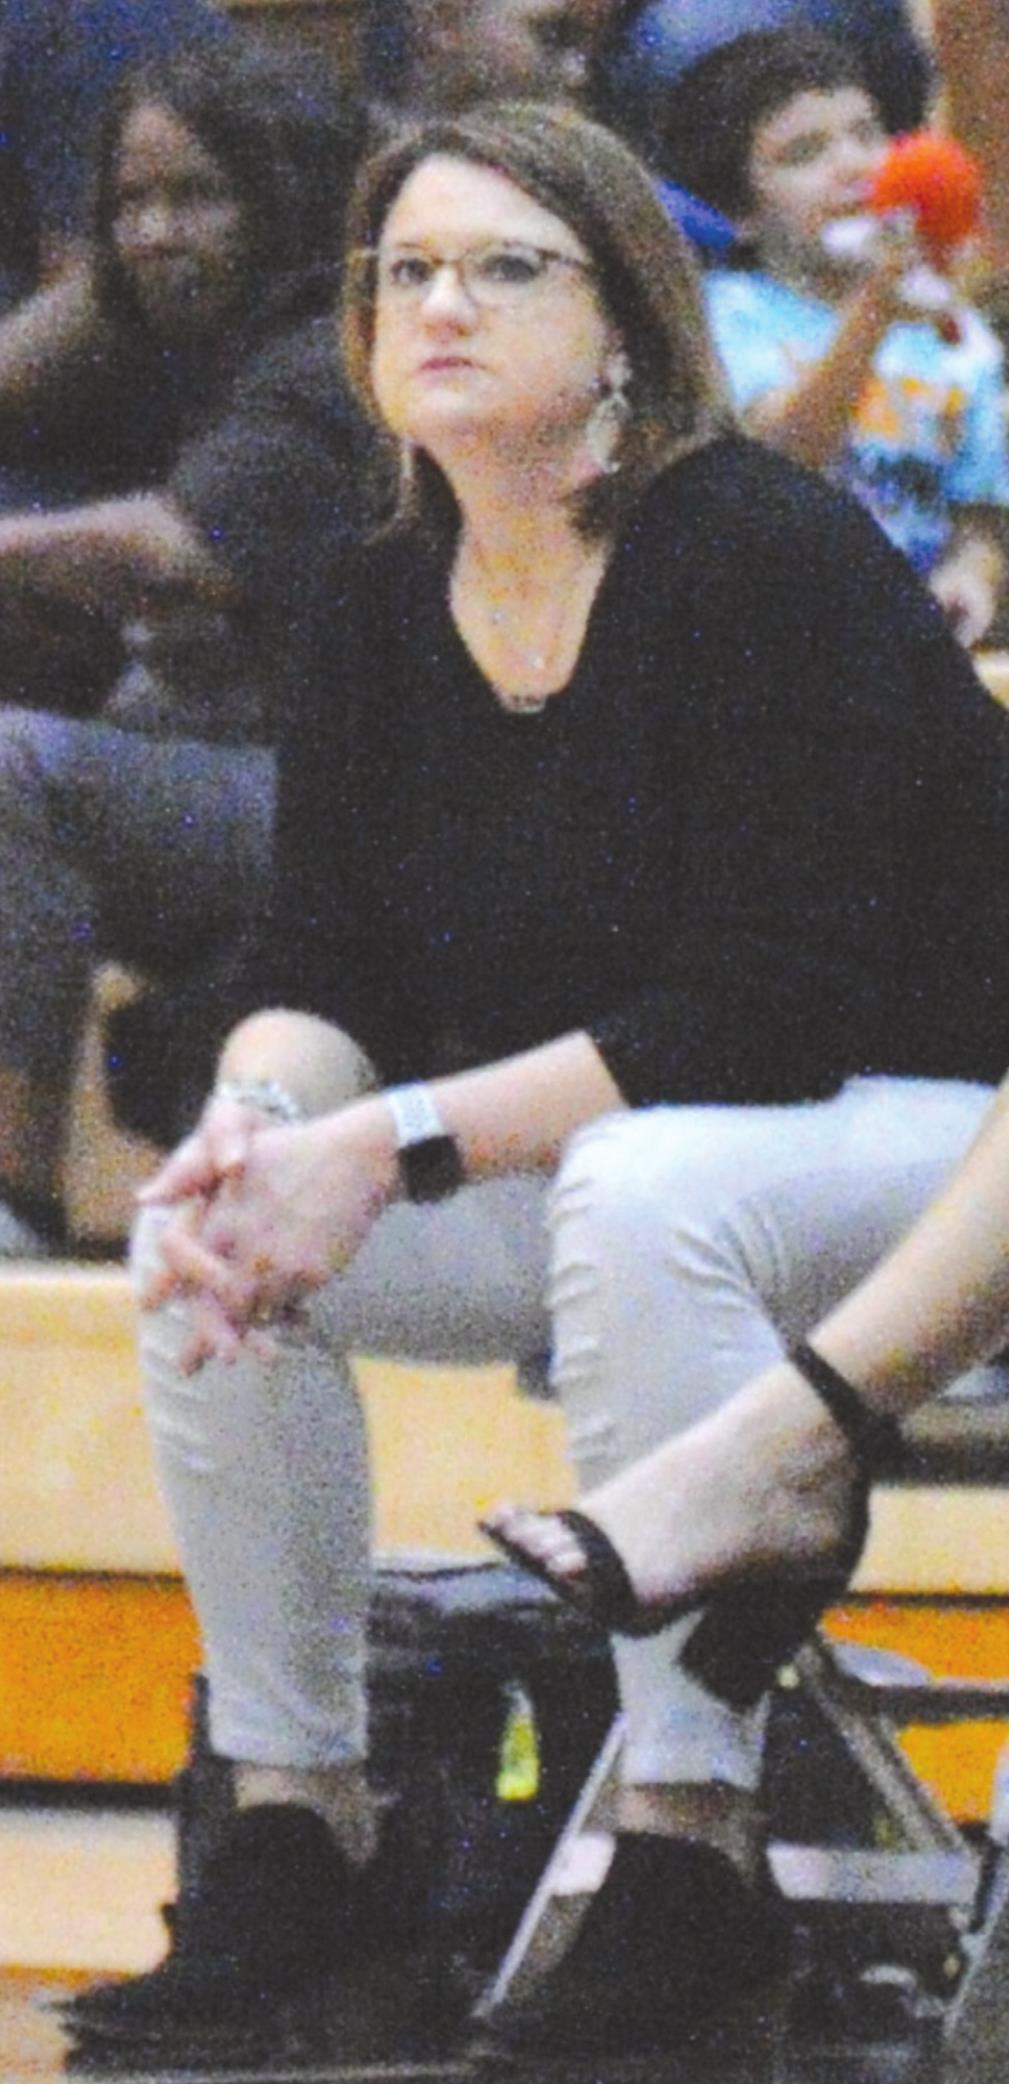 Shelly Pond watches from the sideline during a Weatherford High School Lady Eagle basketball game this past season. She is an assistant coach for the varsity team.Josh Burton/WDN